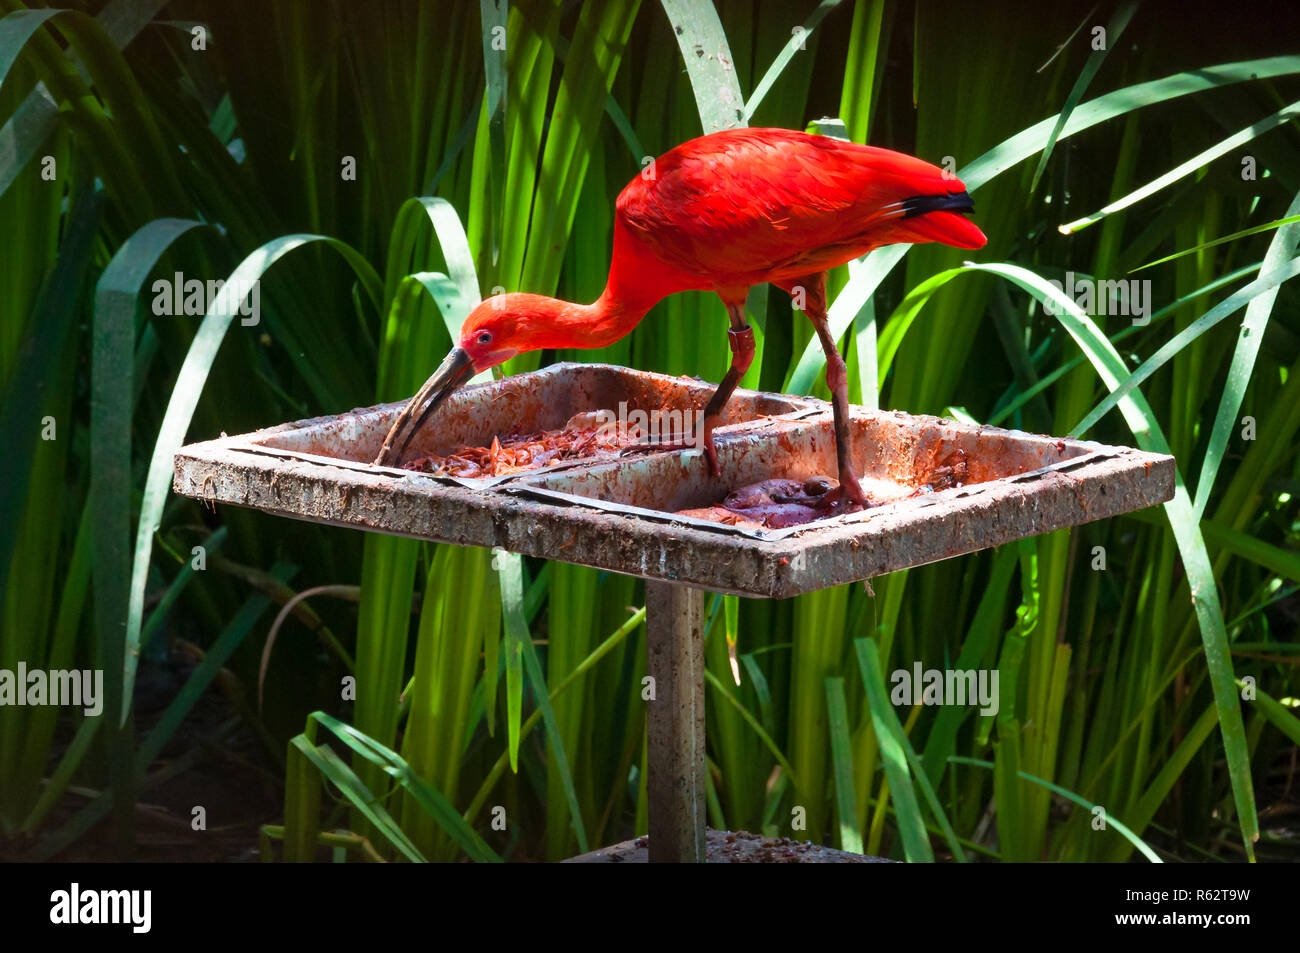 Vibrant red Scarlet Ibis eating on the feeder surrounded by juicy grass stems Stock Photo